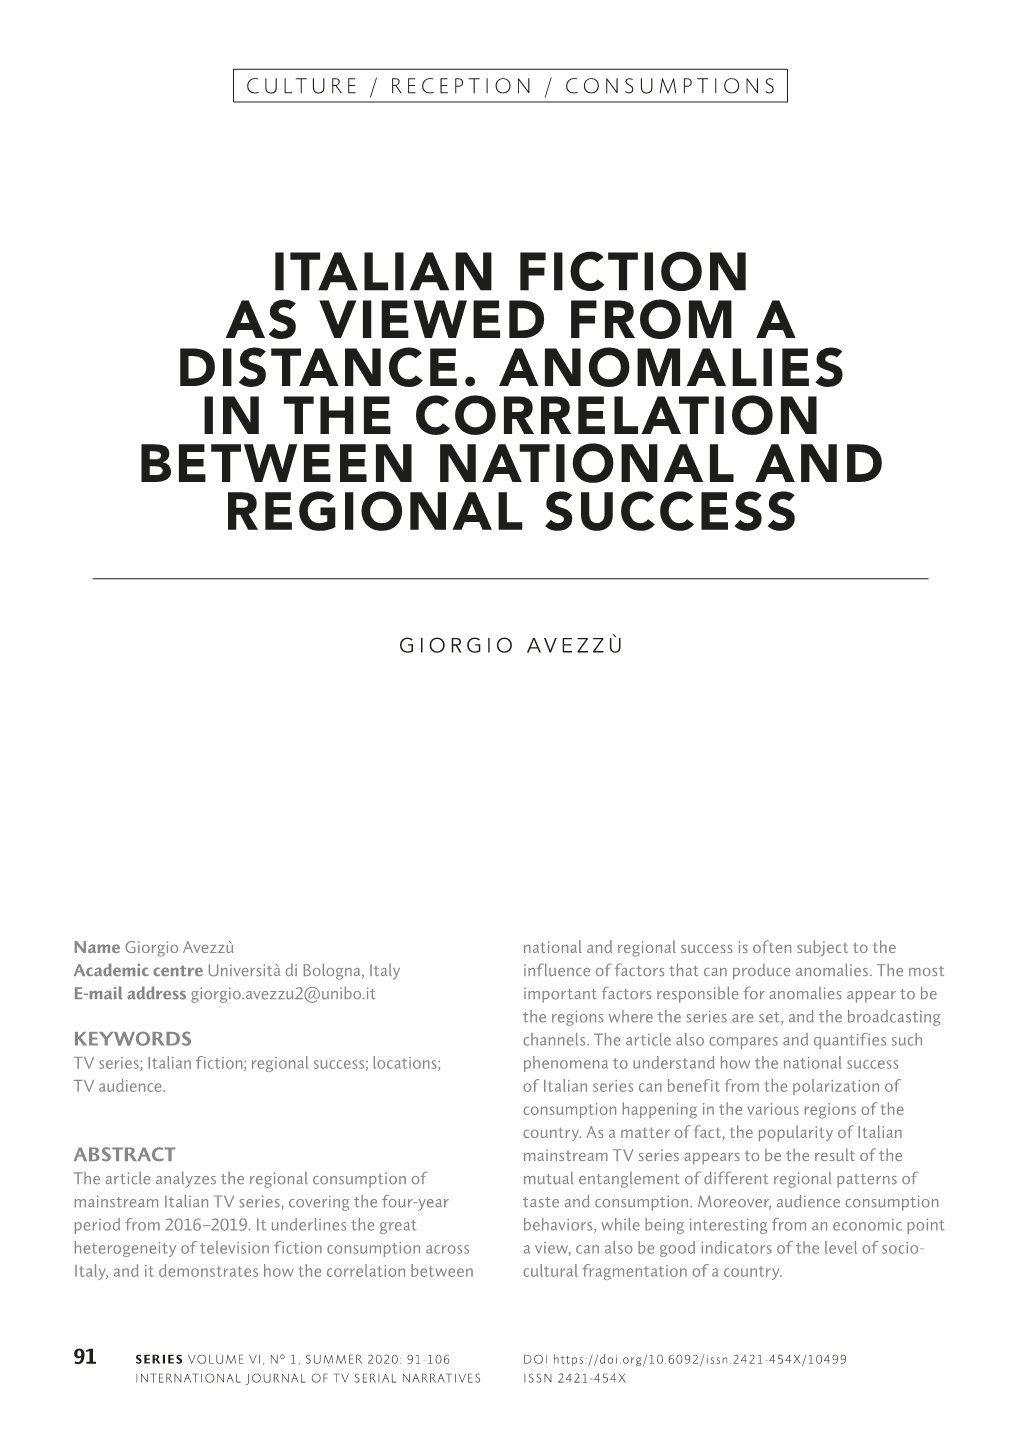 Italian Fiction As Viewed from a Distance. Anomalies in the Correlation Between National and Regional Success